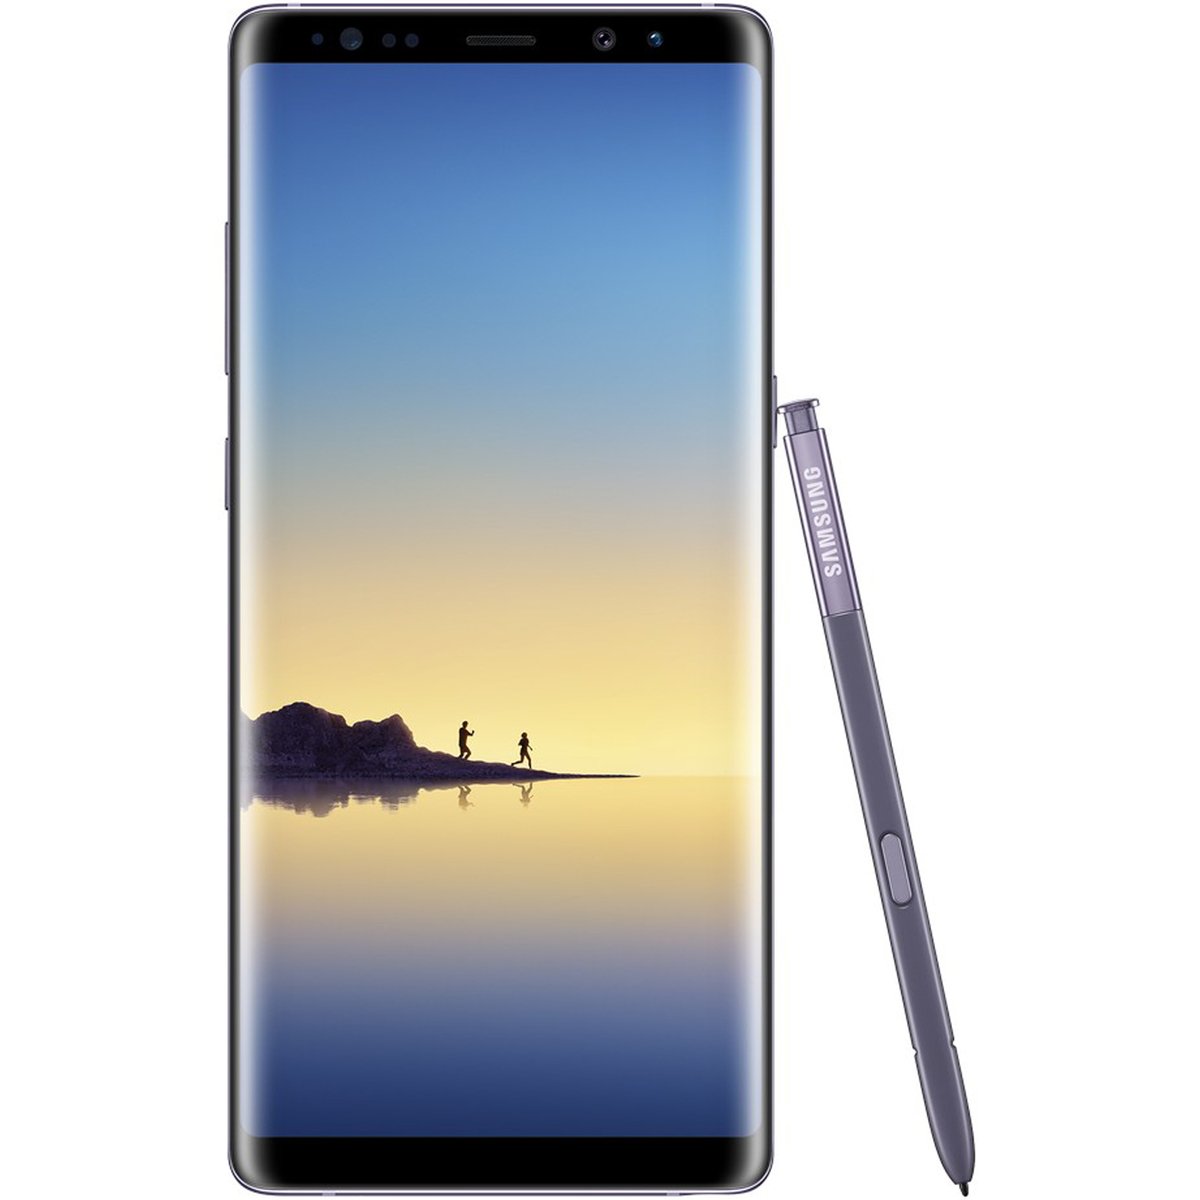 Samsung Galaxy Note8-SMN950F Orchid Gray